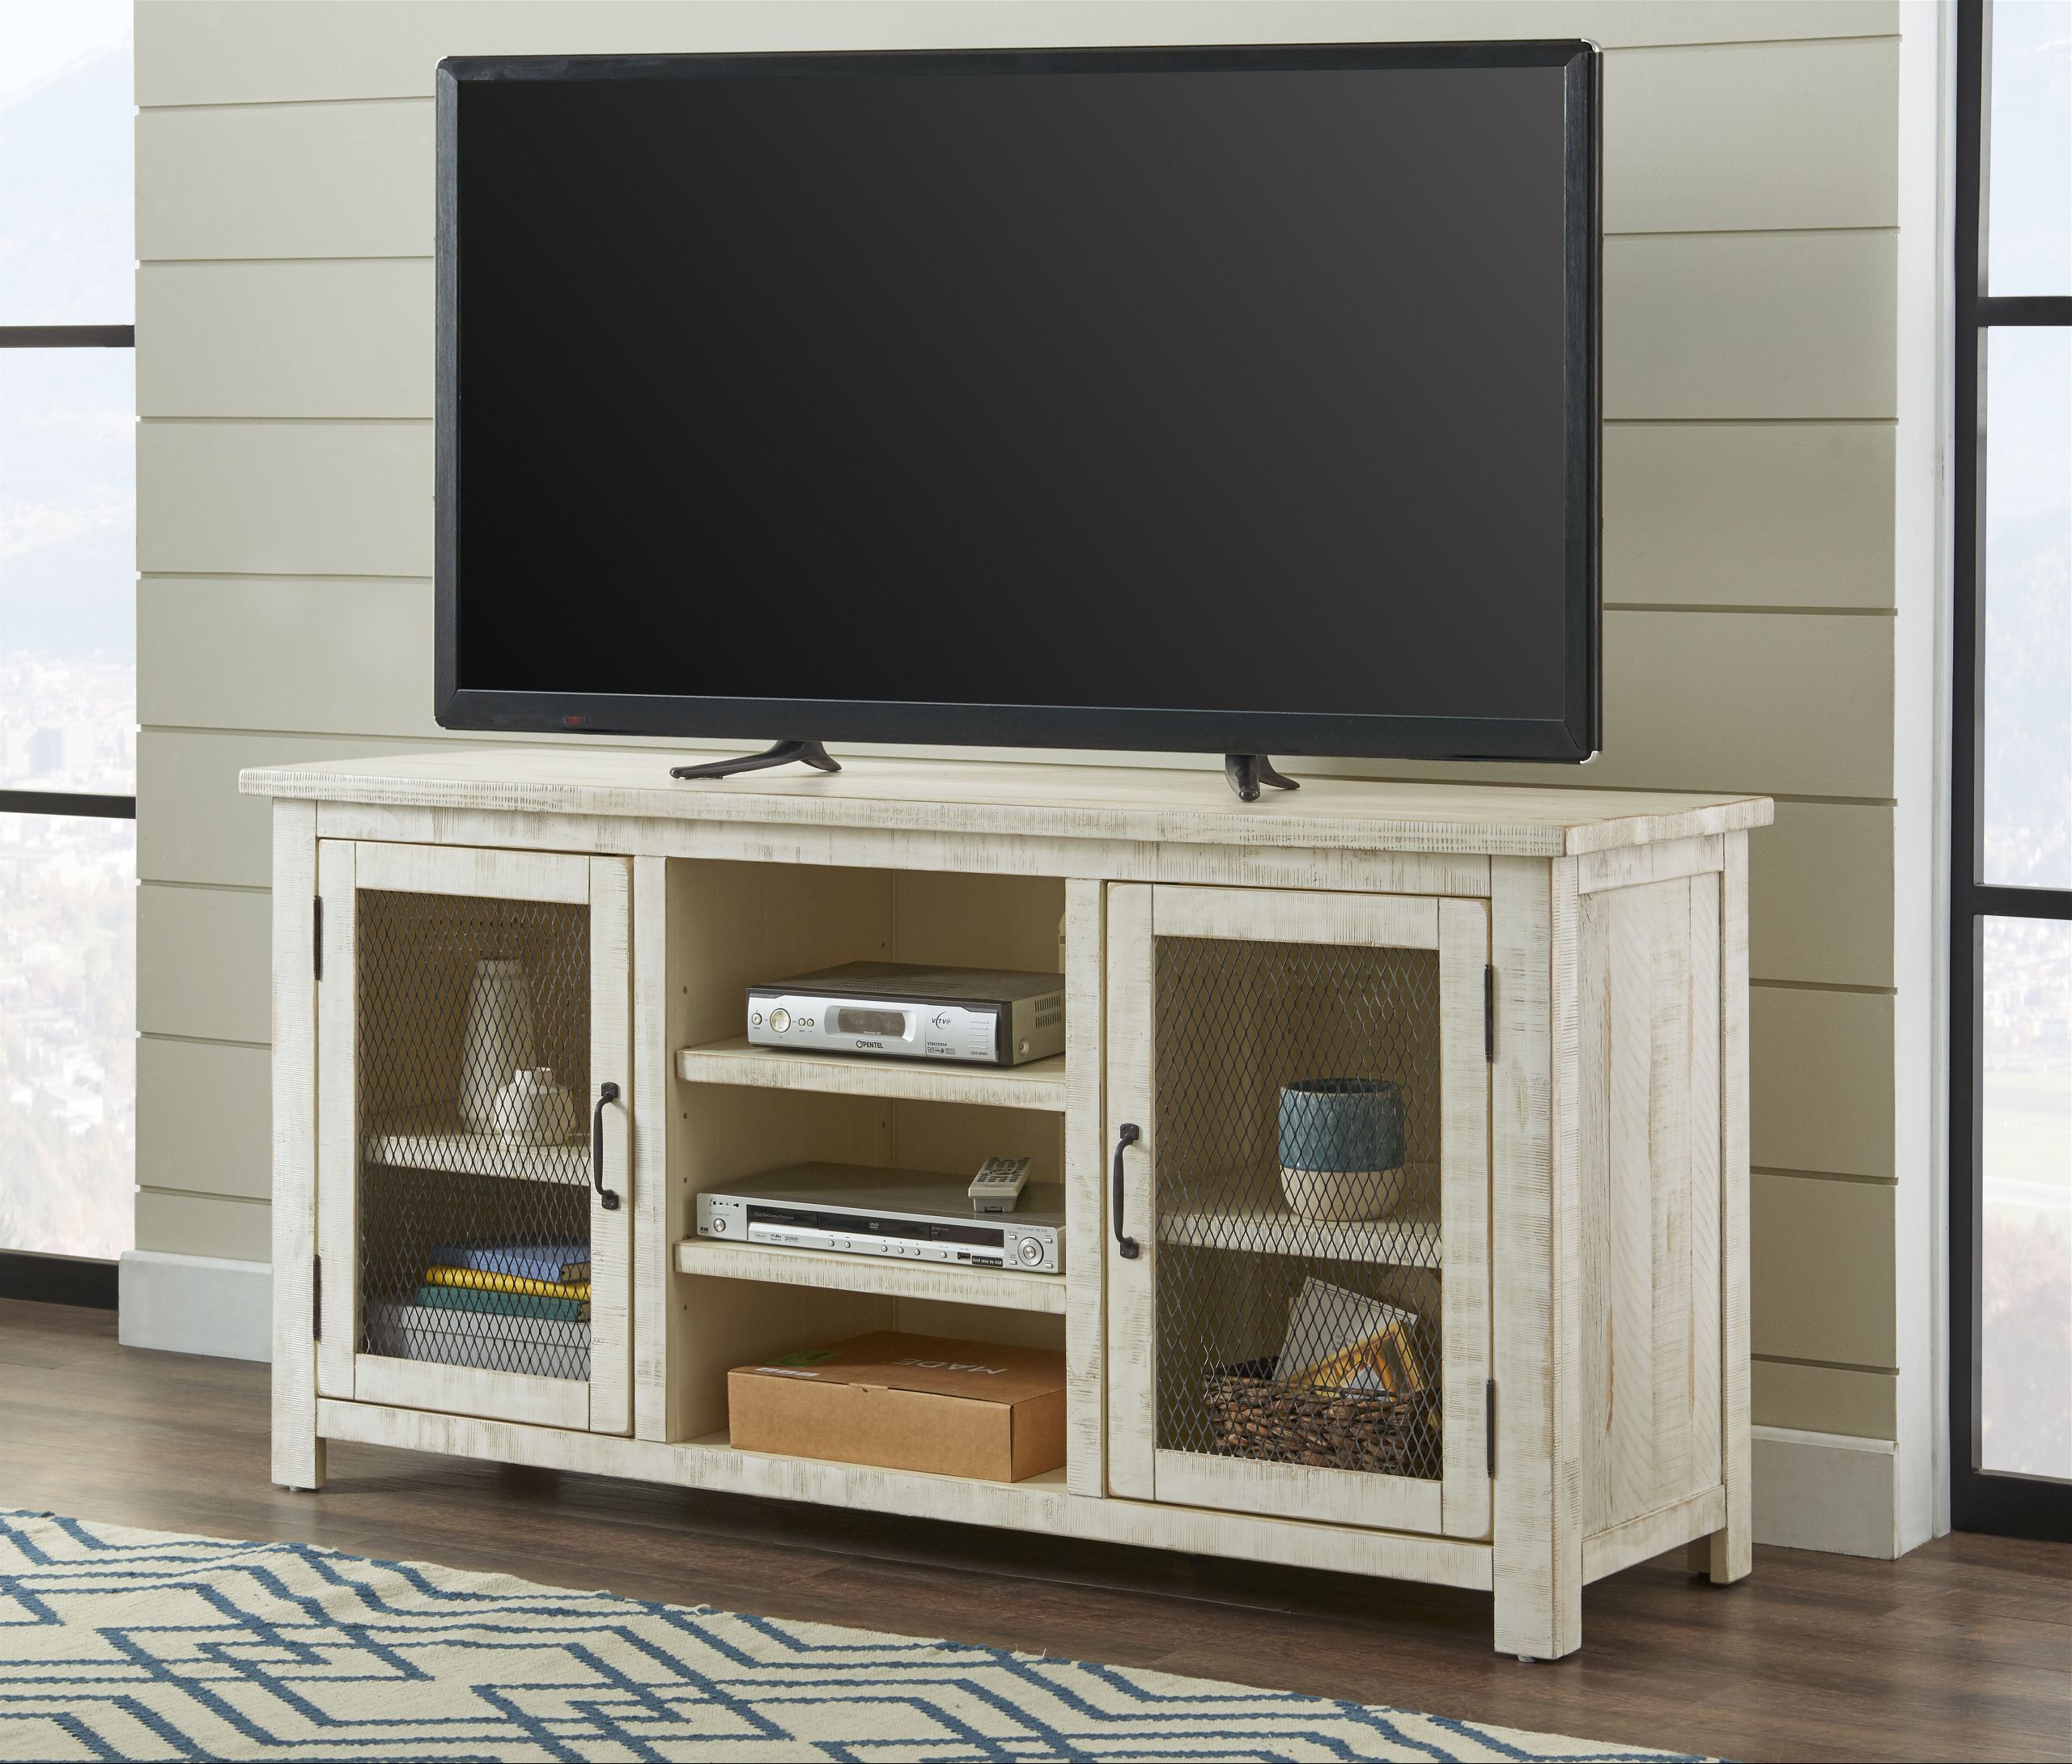 65 Inch Tv Over Fireplace Awesome Satchell solid Wood Tv Stand for Tvs Up to 65"